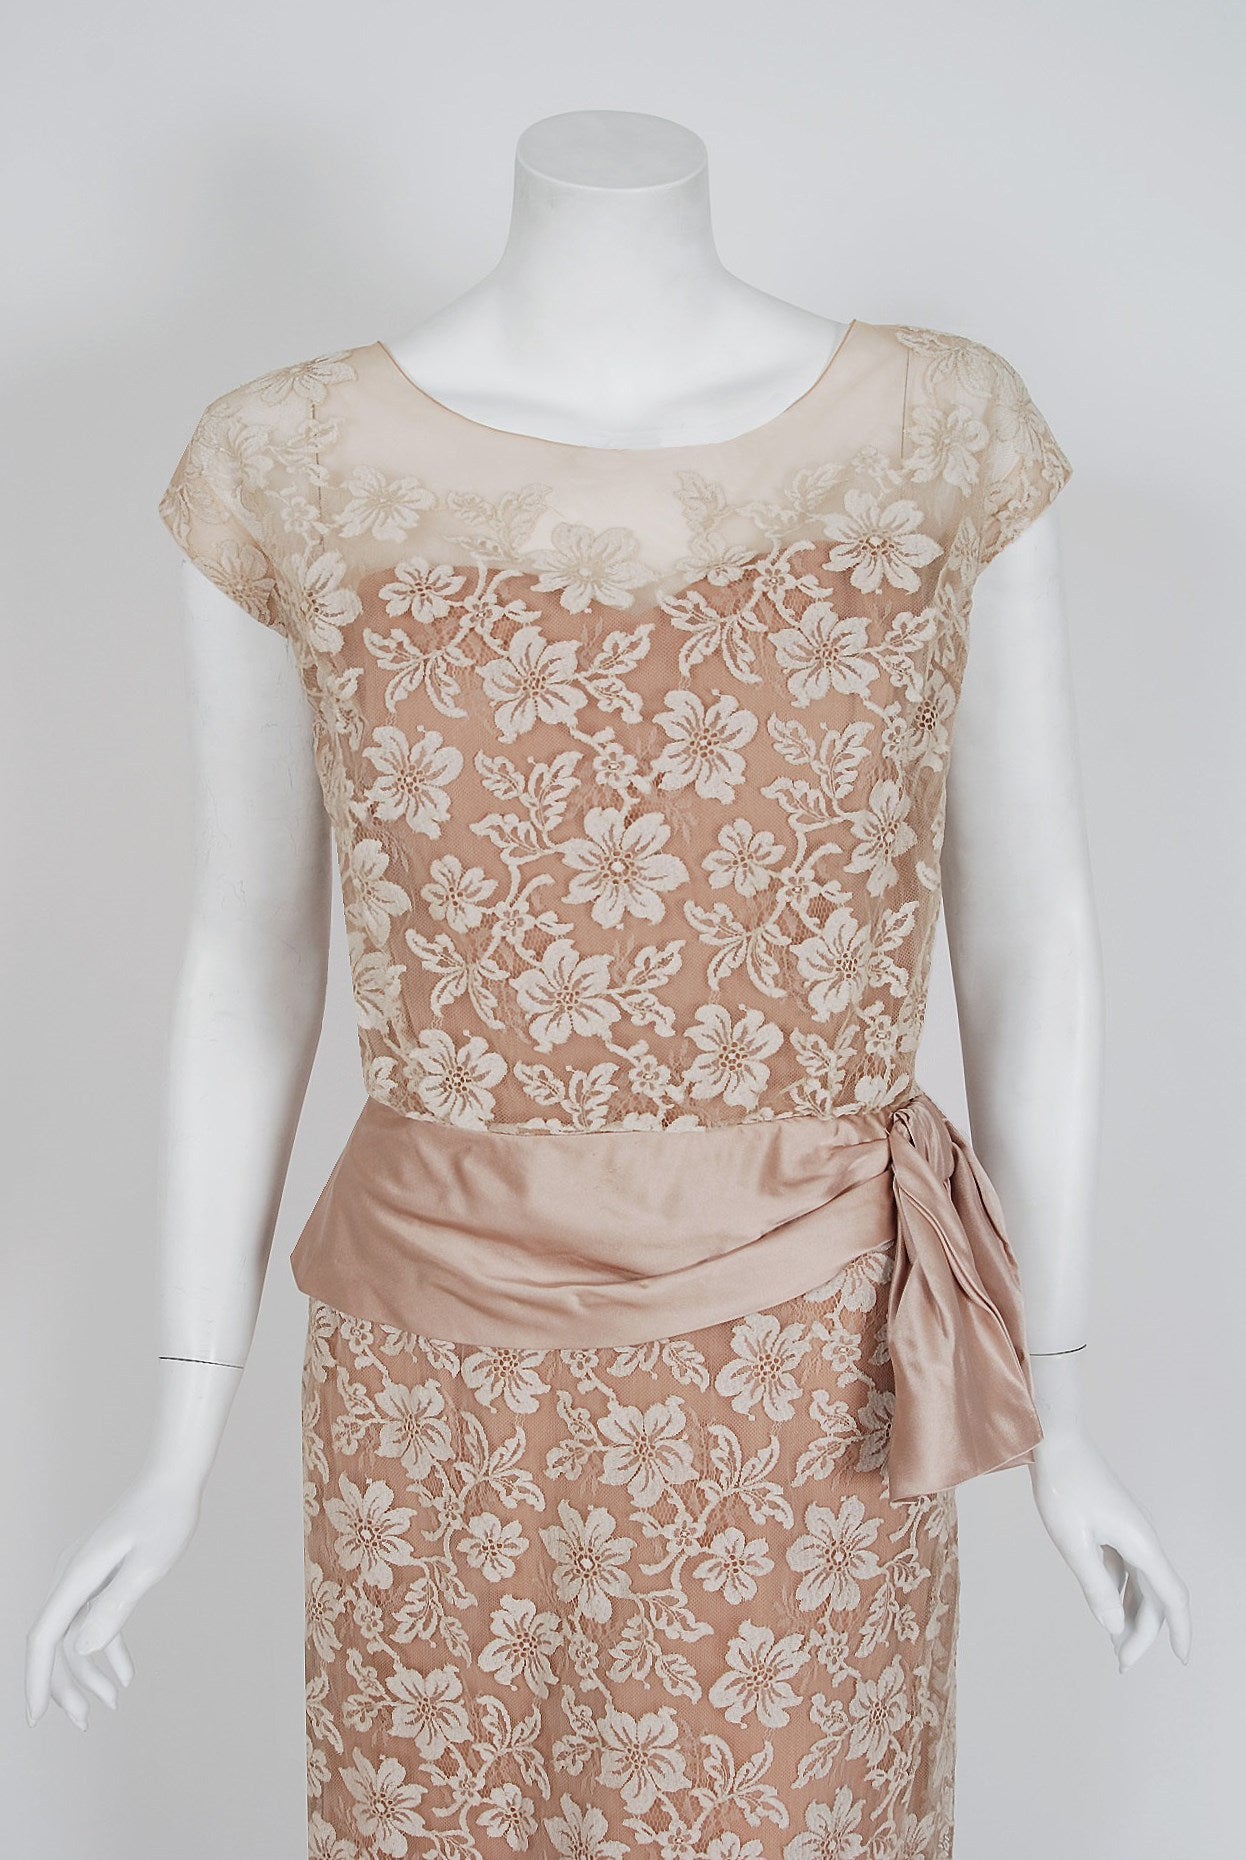 An amazing and highly stylized 1950's cocktail dress by the famous American designer Peggy Hunt. Starting in the 1930's through the early 1960's, she was immensely successful with her specialized cocktail and evening dresses. Her garments were often